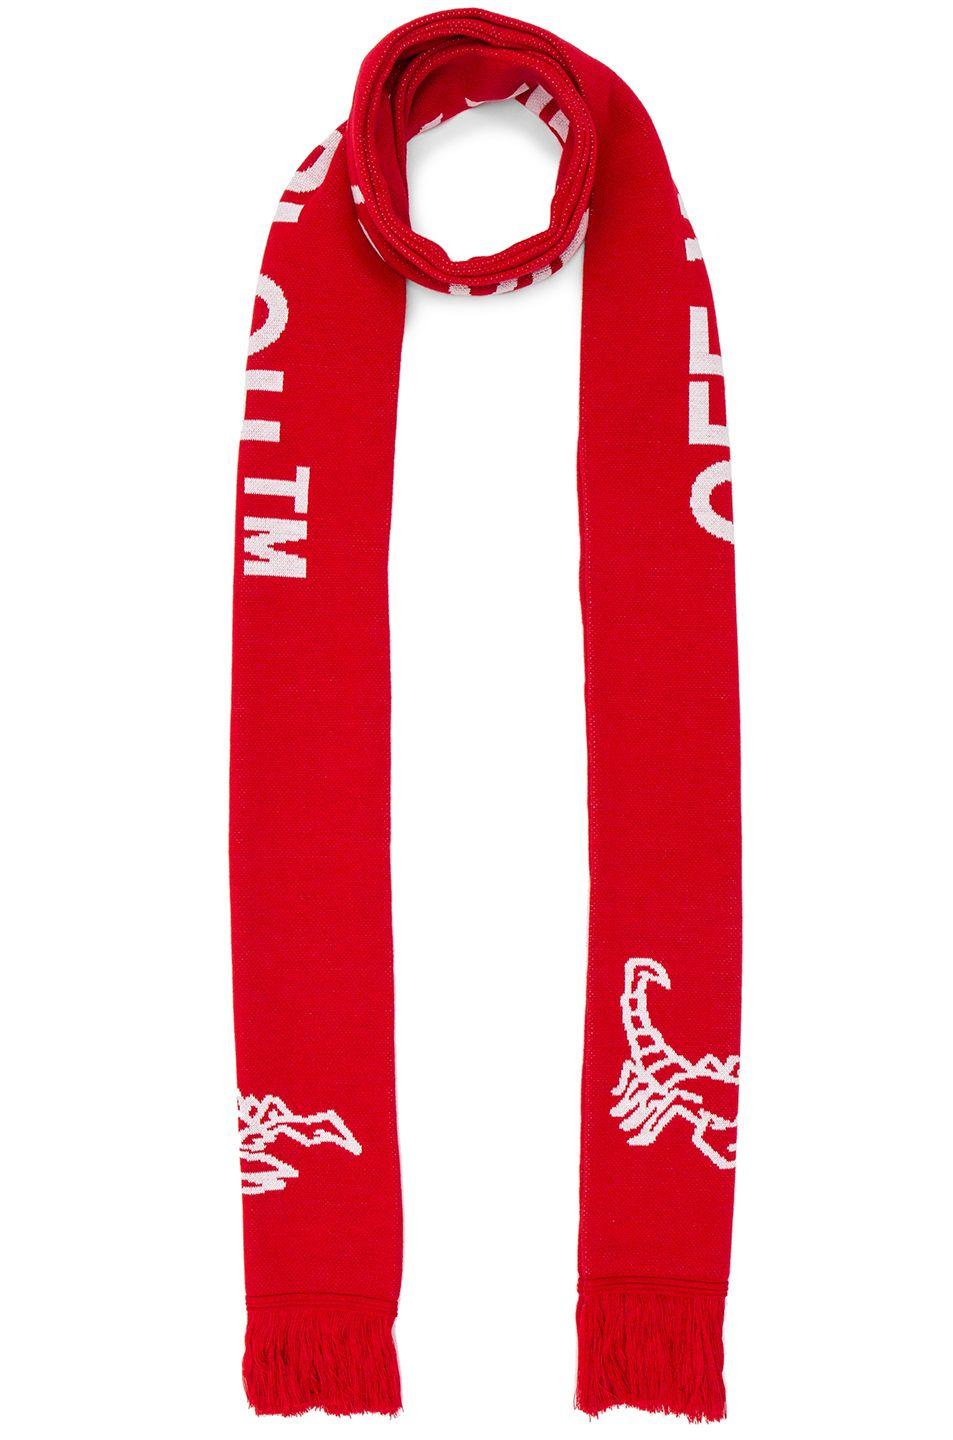 Red and White Scorpion Logo - OFF-WHITE Scorpion Big Scarf in Red & White | FWRD